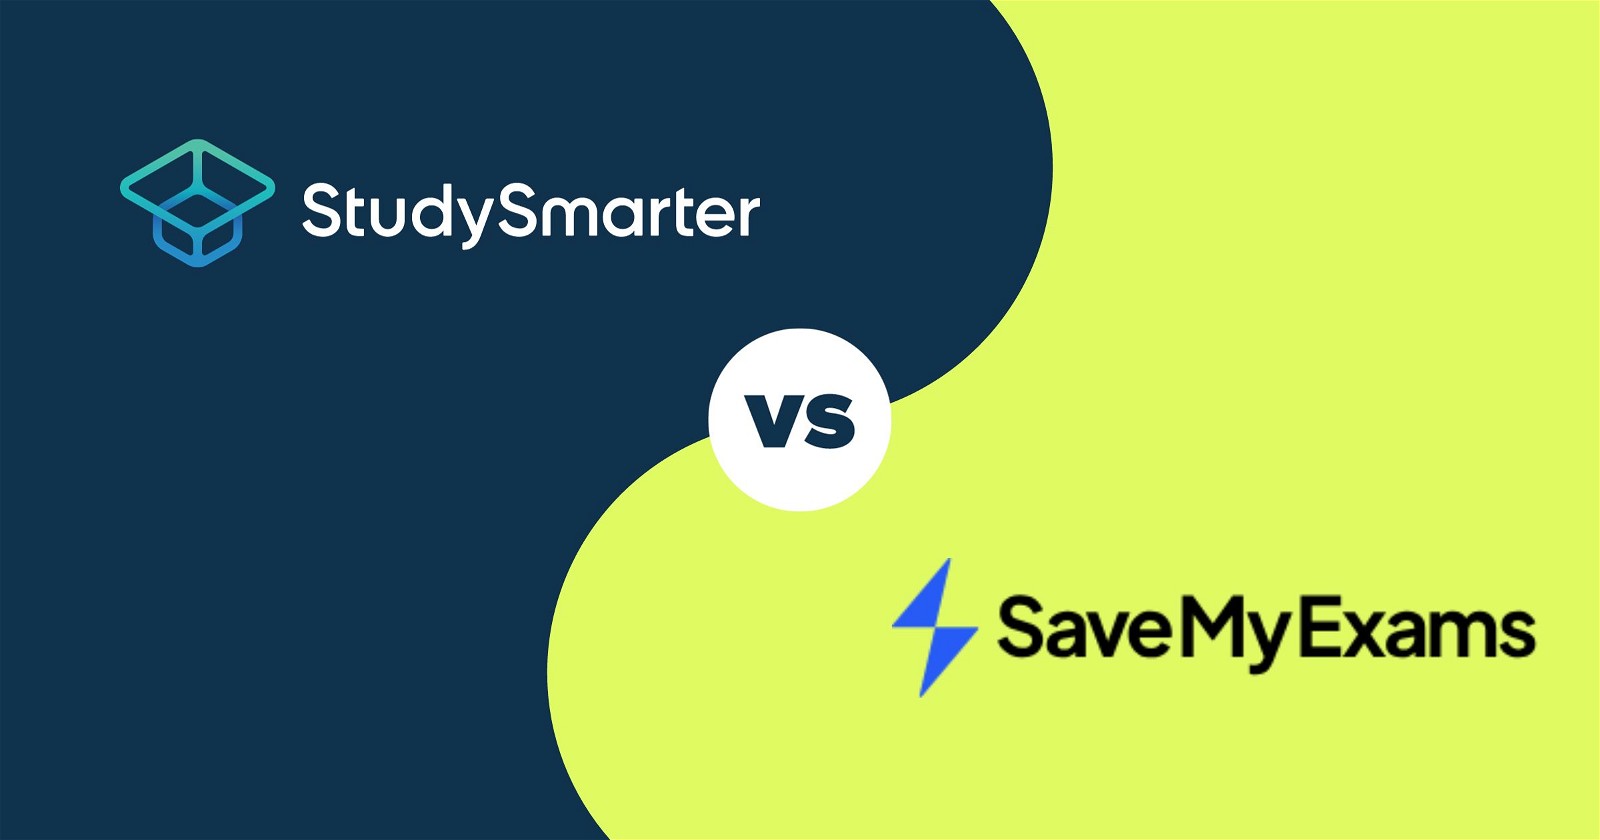 Compare Savemyexams vs StudySmarter for the number one free learning app to improve your grades, StudySmarter Magazine